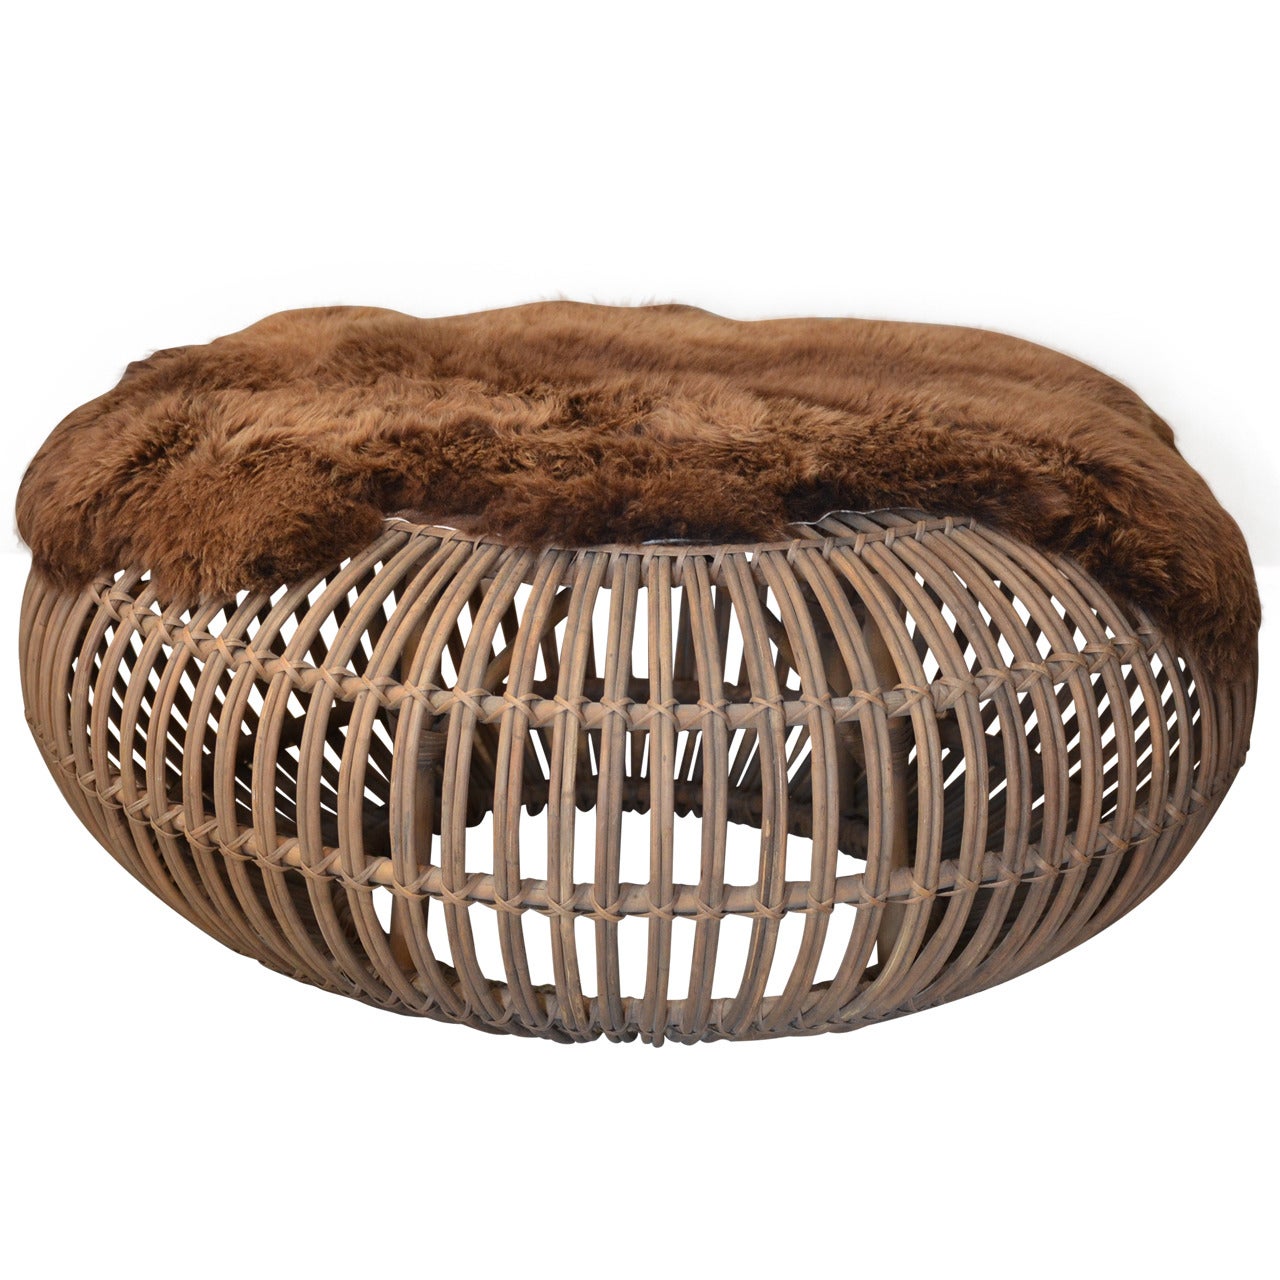 Large Round Rattan Ottoman with Thick Fur Cover by Franco Albini